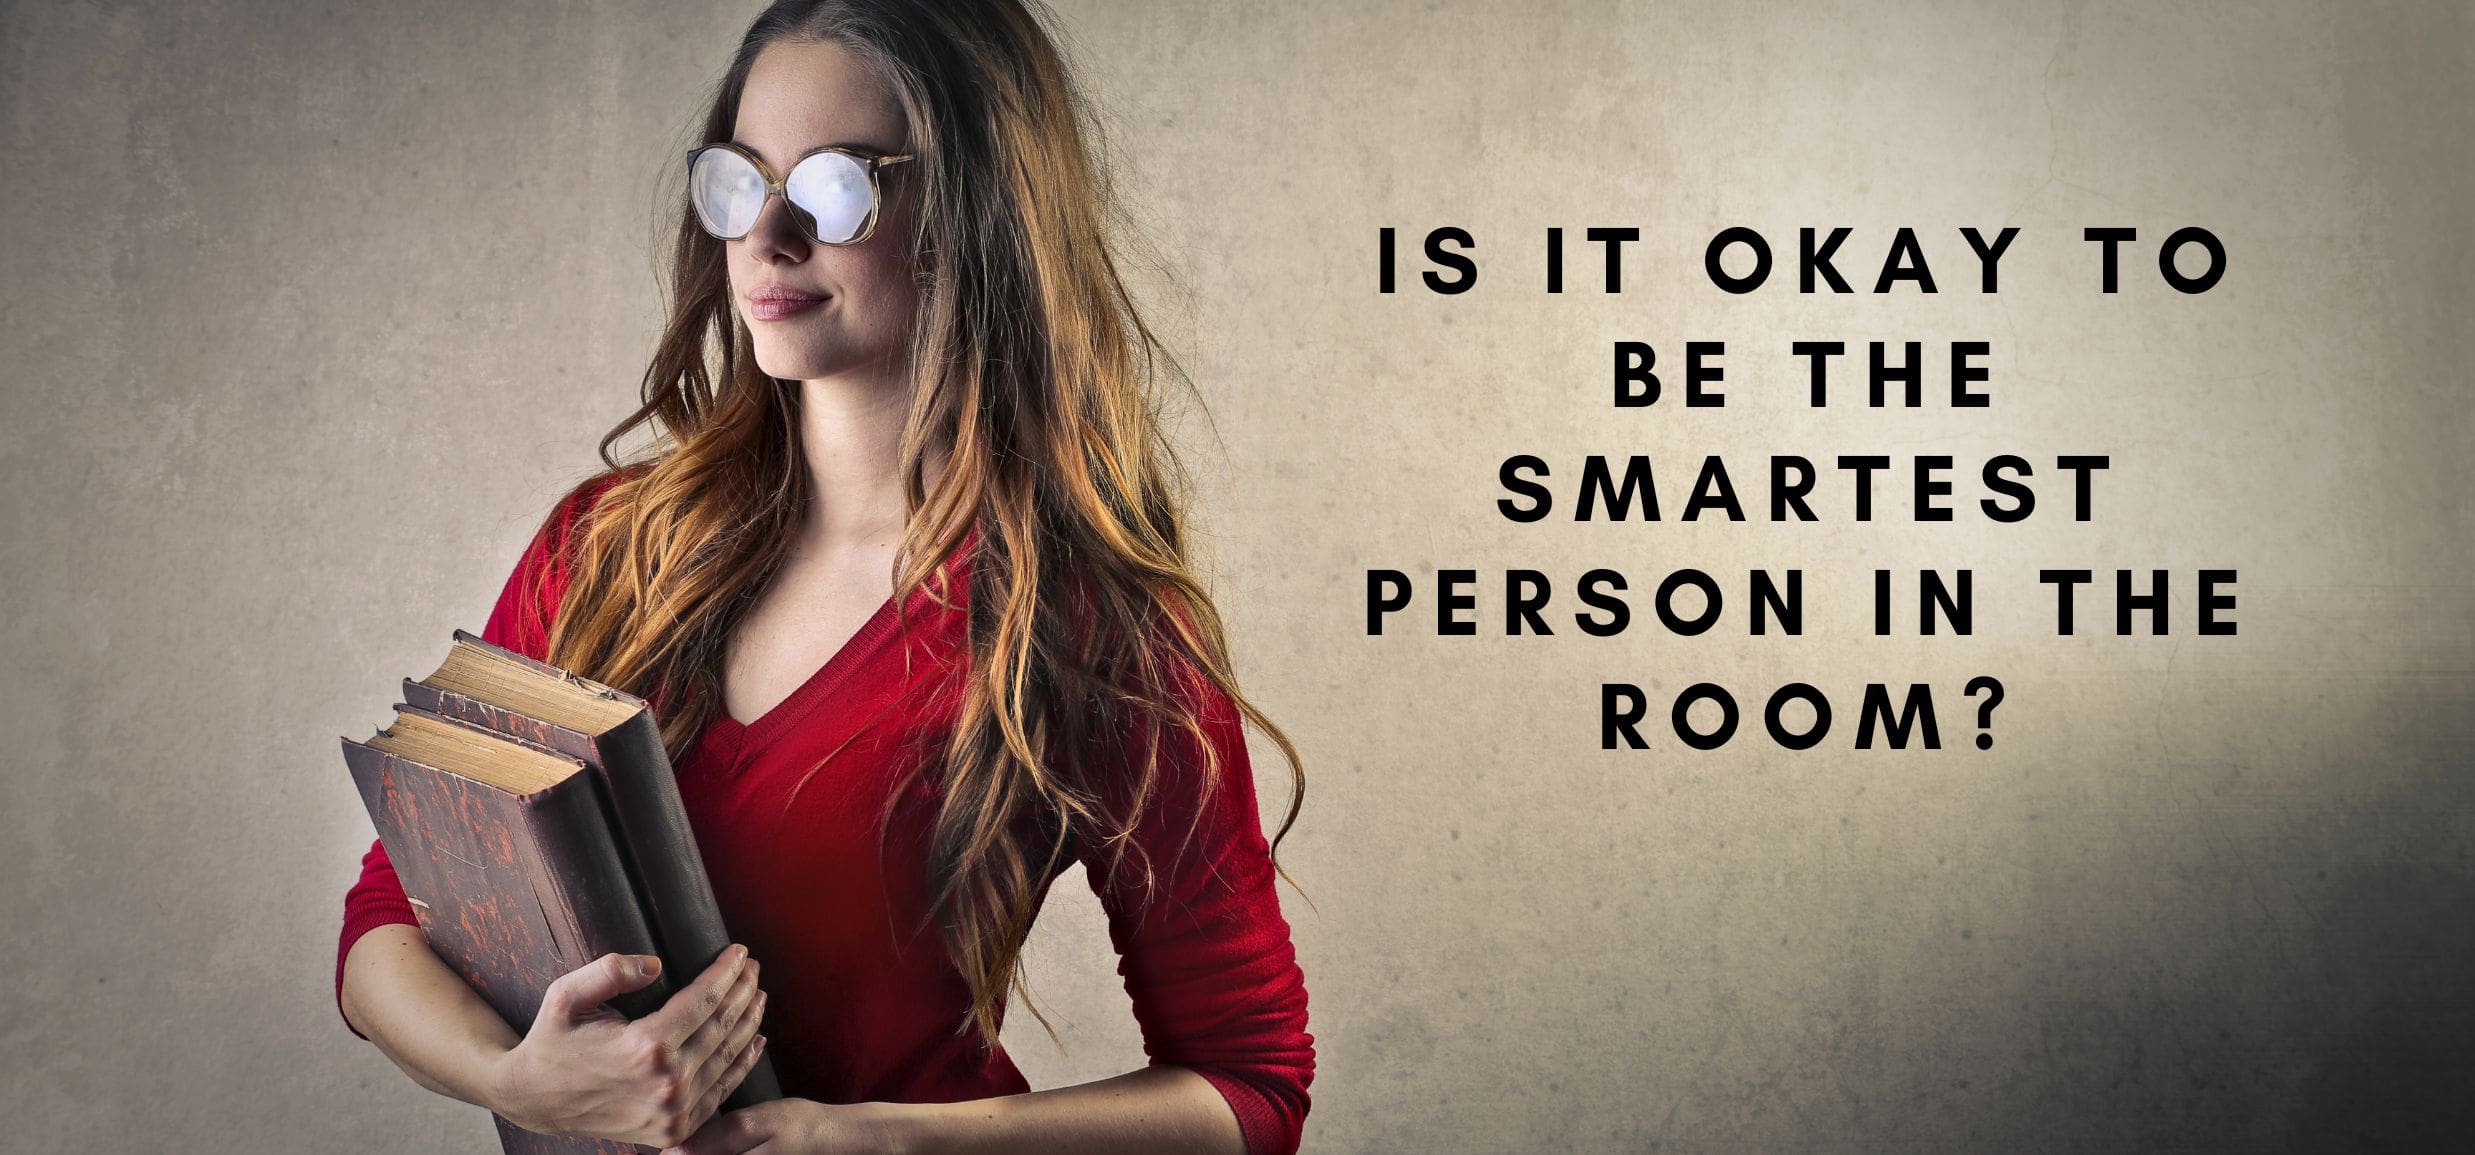 Is it okay to be the smartest person in the room?